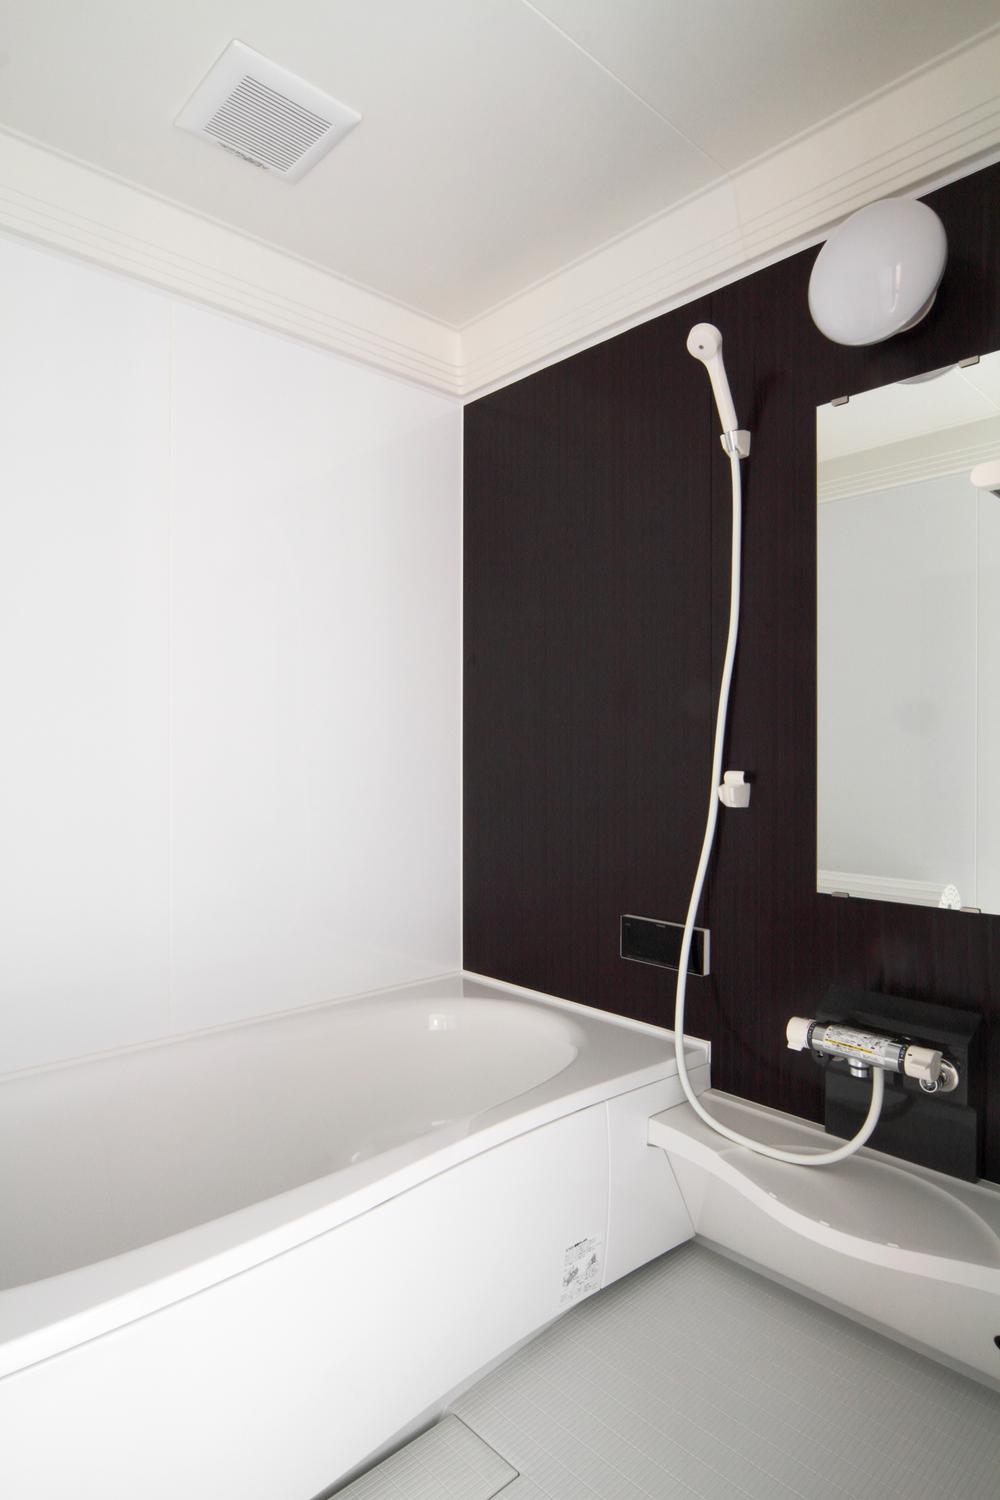 Bathroom. State-of-the-art amenities in the bathroom (1 pyeong type) Easy also clean